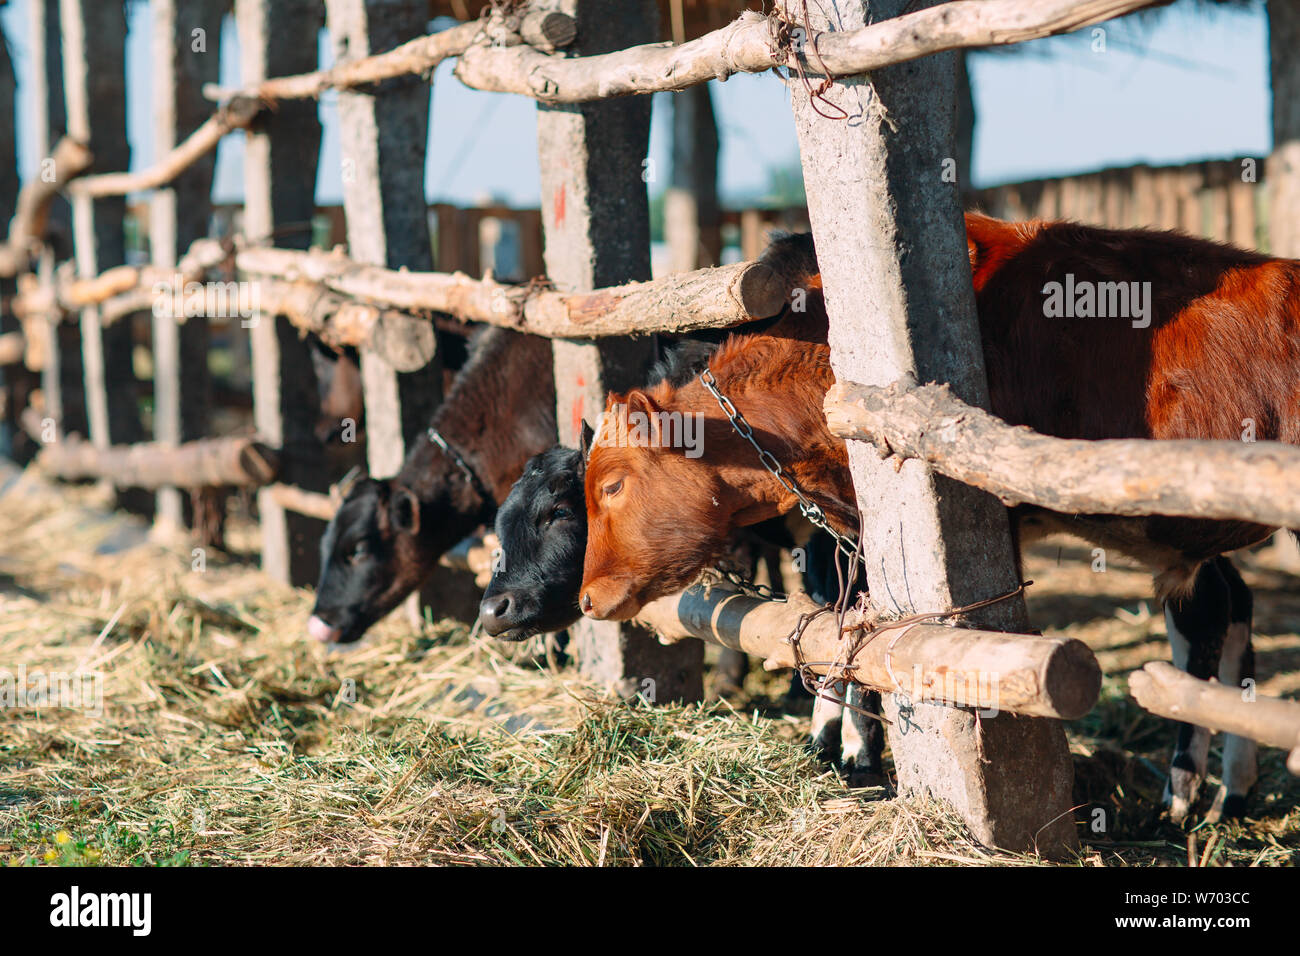 agriculture industry, farming and animal husbandry concept. herd of cows in  cowshed on dairy farm Stock Photo - Alamy